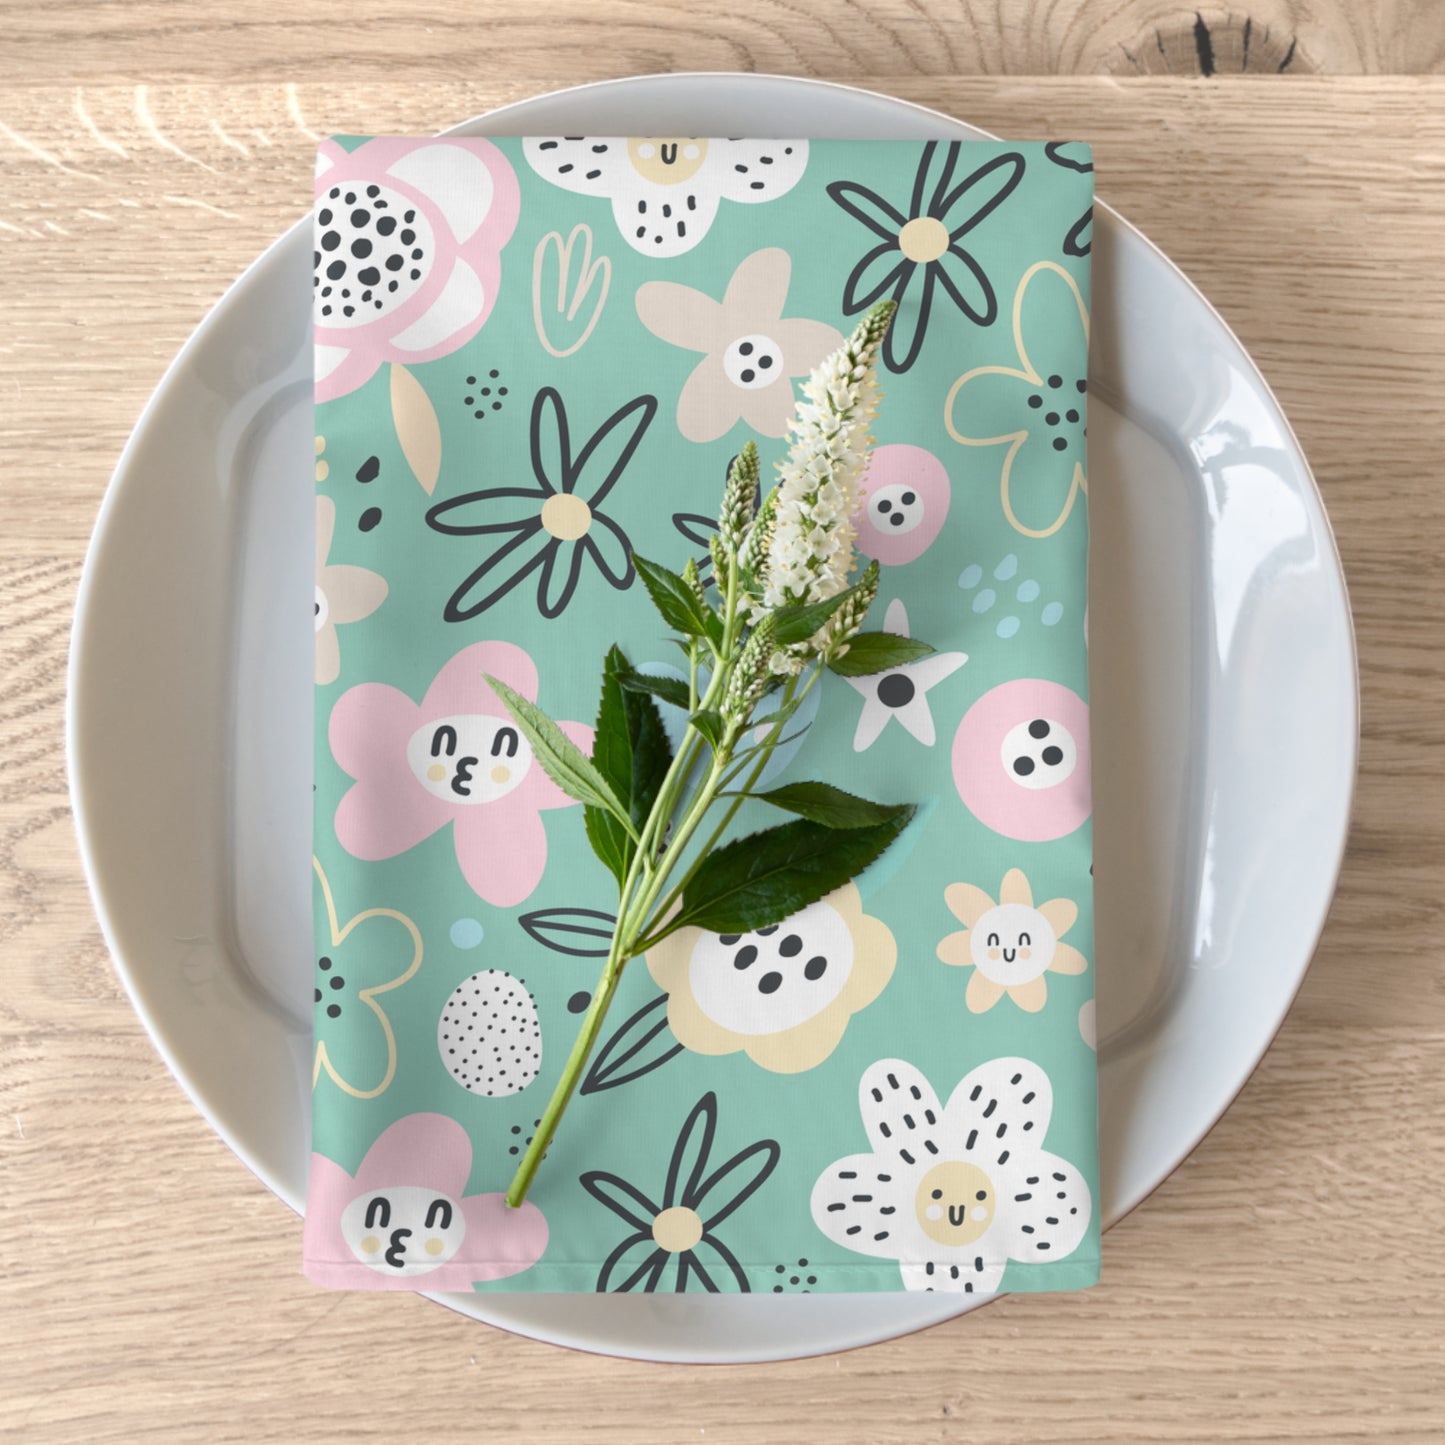 Abstract Flowers 4 Pack Cloth Napkins 19x19